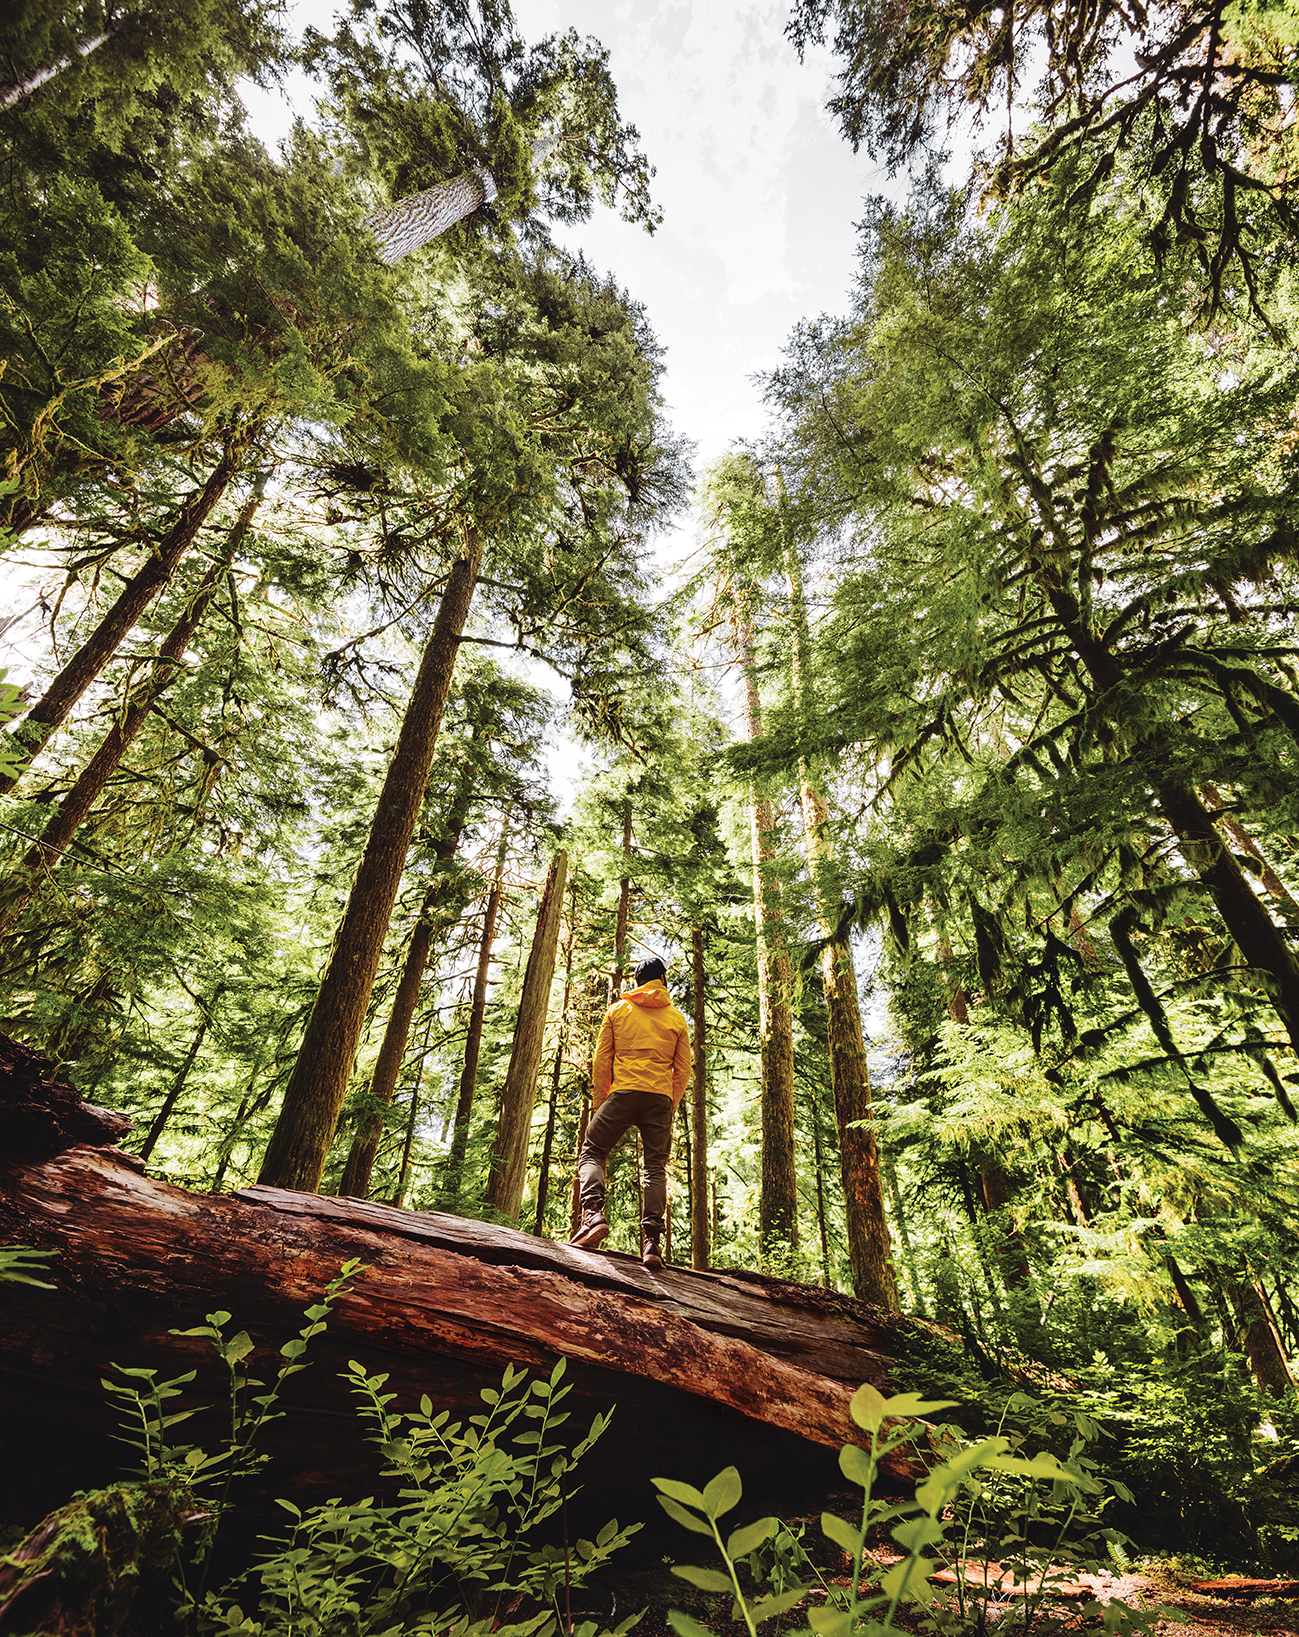 "Hiker wearing a yellow jacket standing on a fallen tree in the Hoh rain forest"